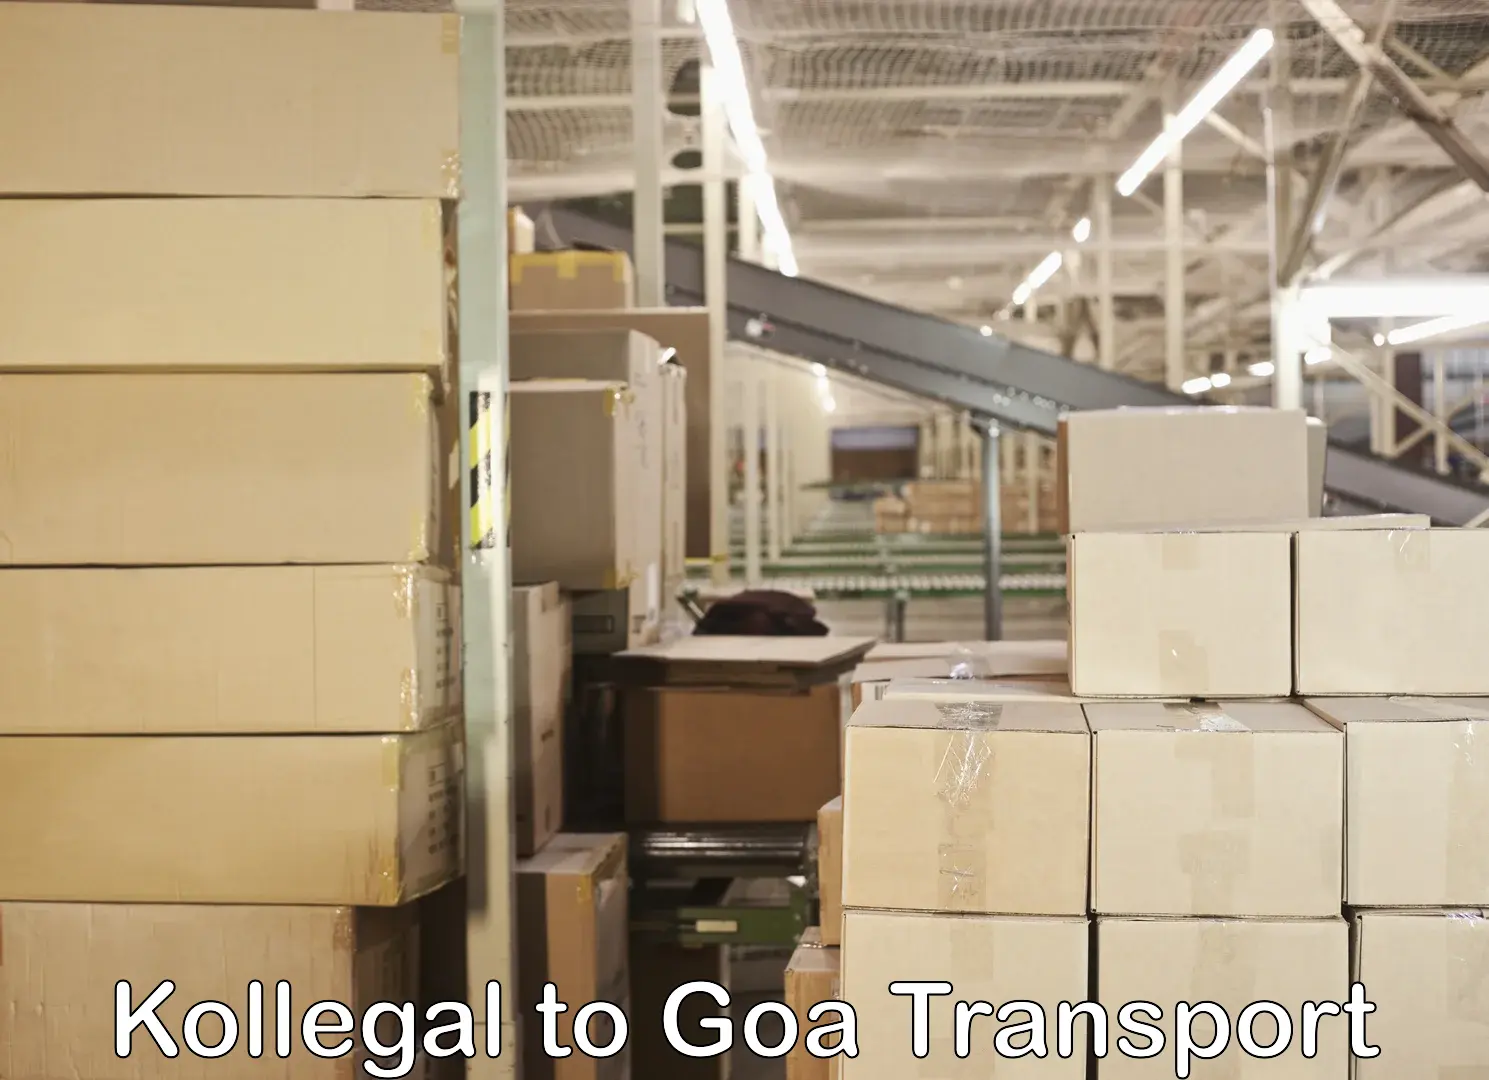 Transport in sharing Kollegal to Goa